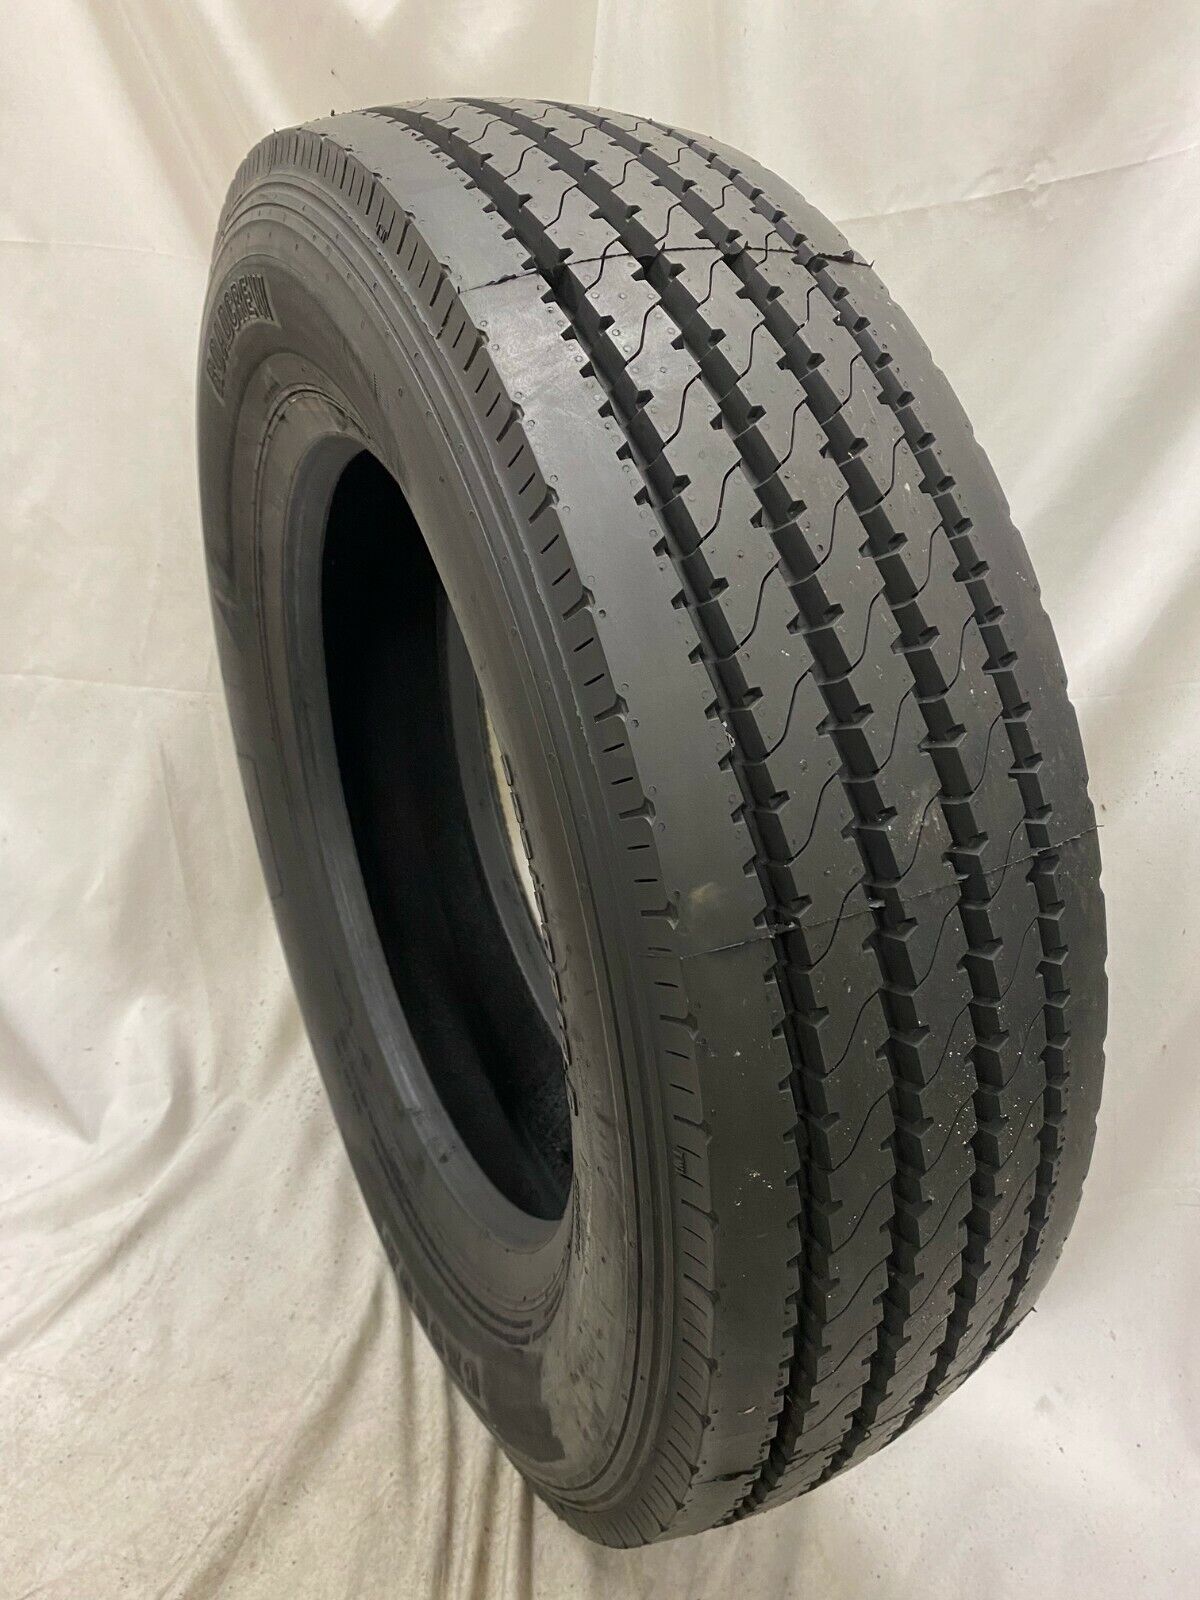 1 Tire, 225/70R19.5 ROAD CREW CR906 STEE, 128/126L STEER ALL POSITIONS 2257019.5